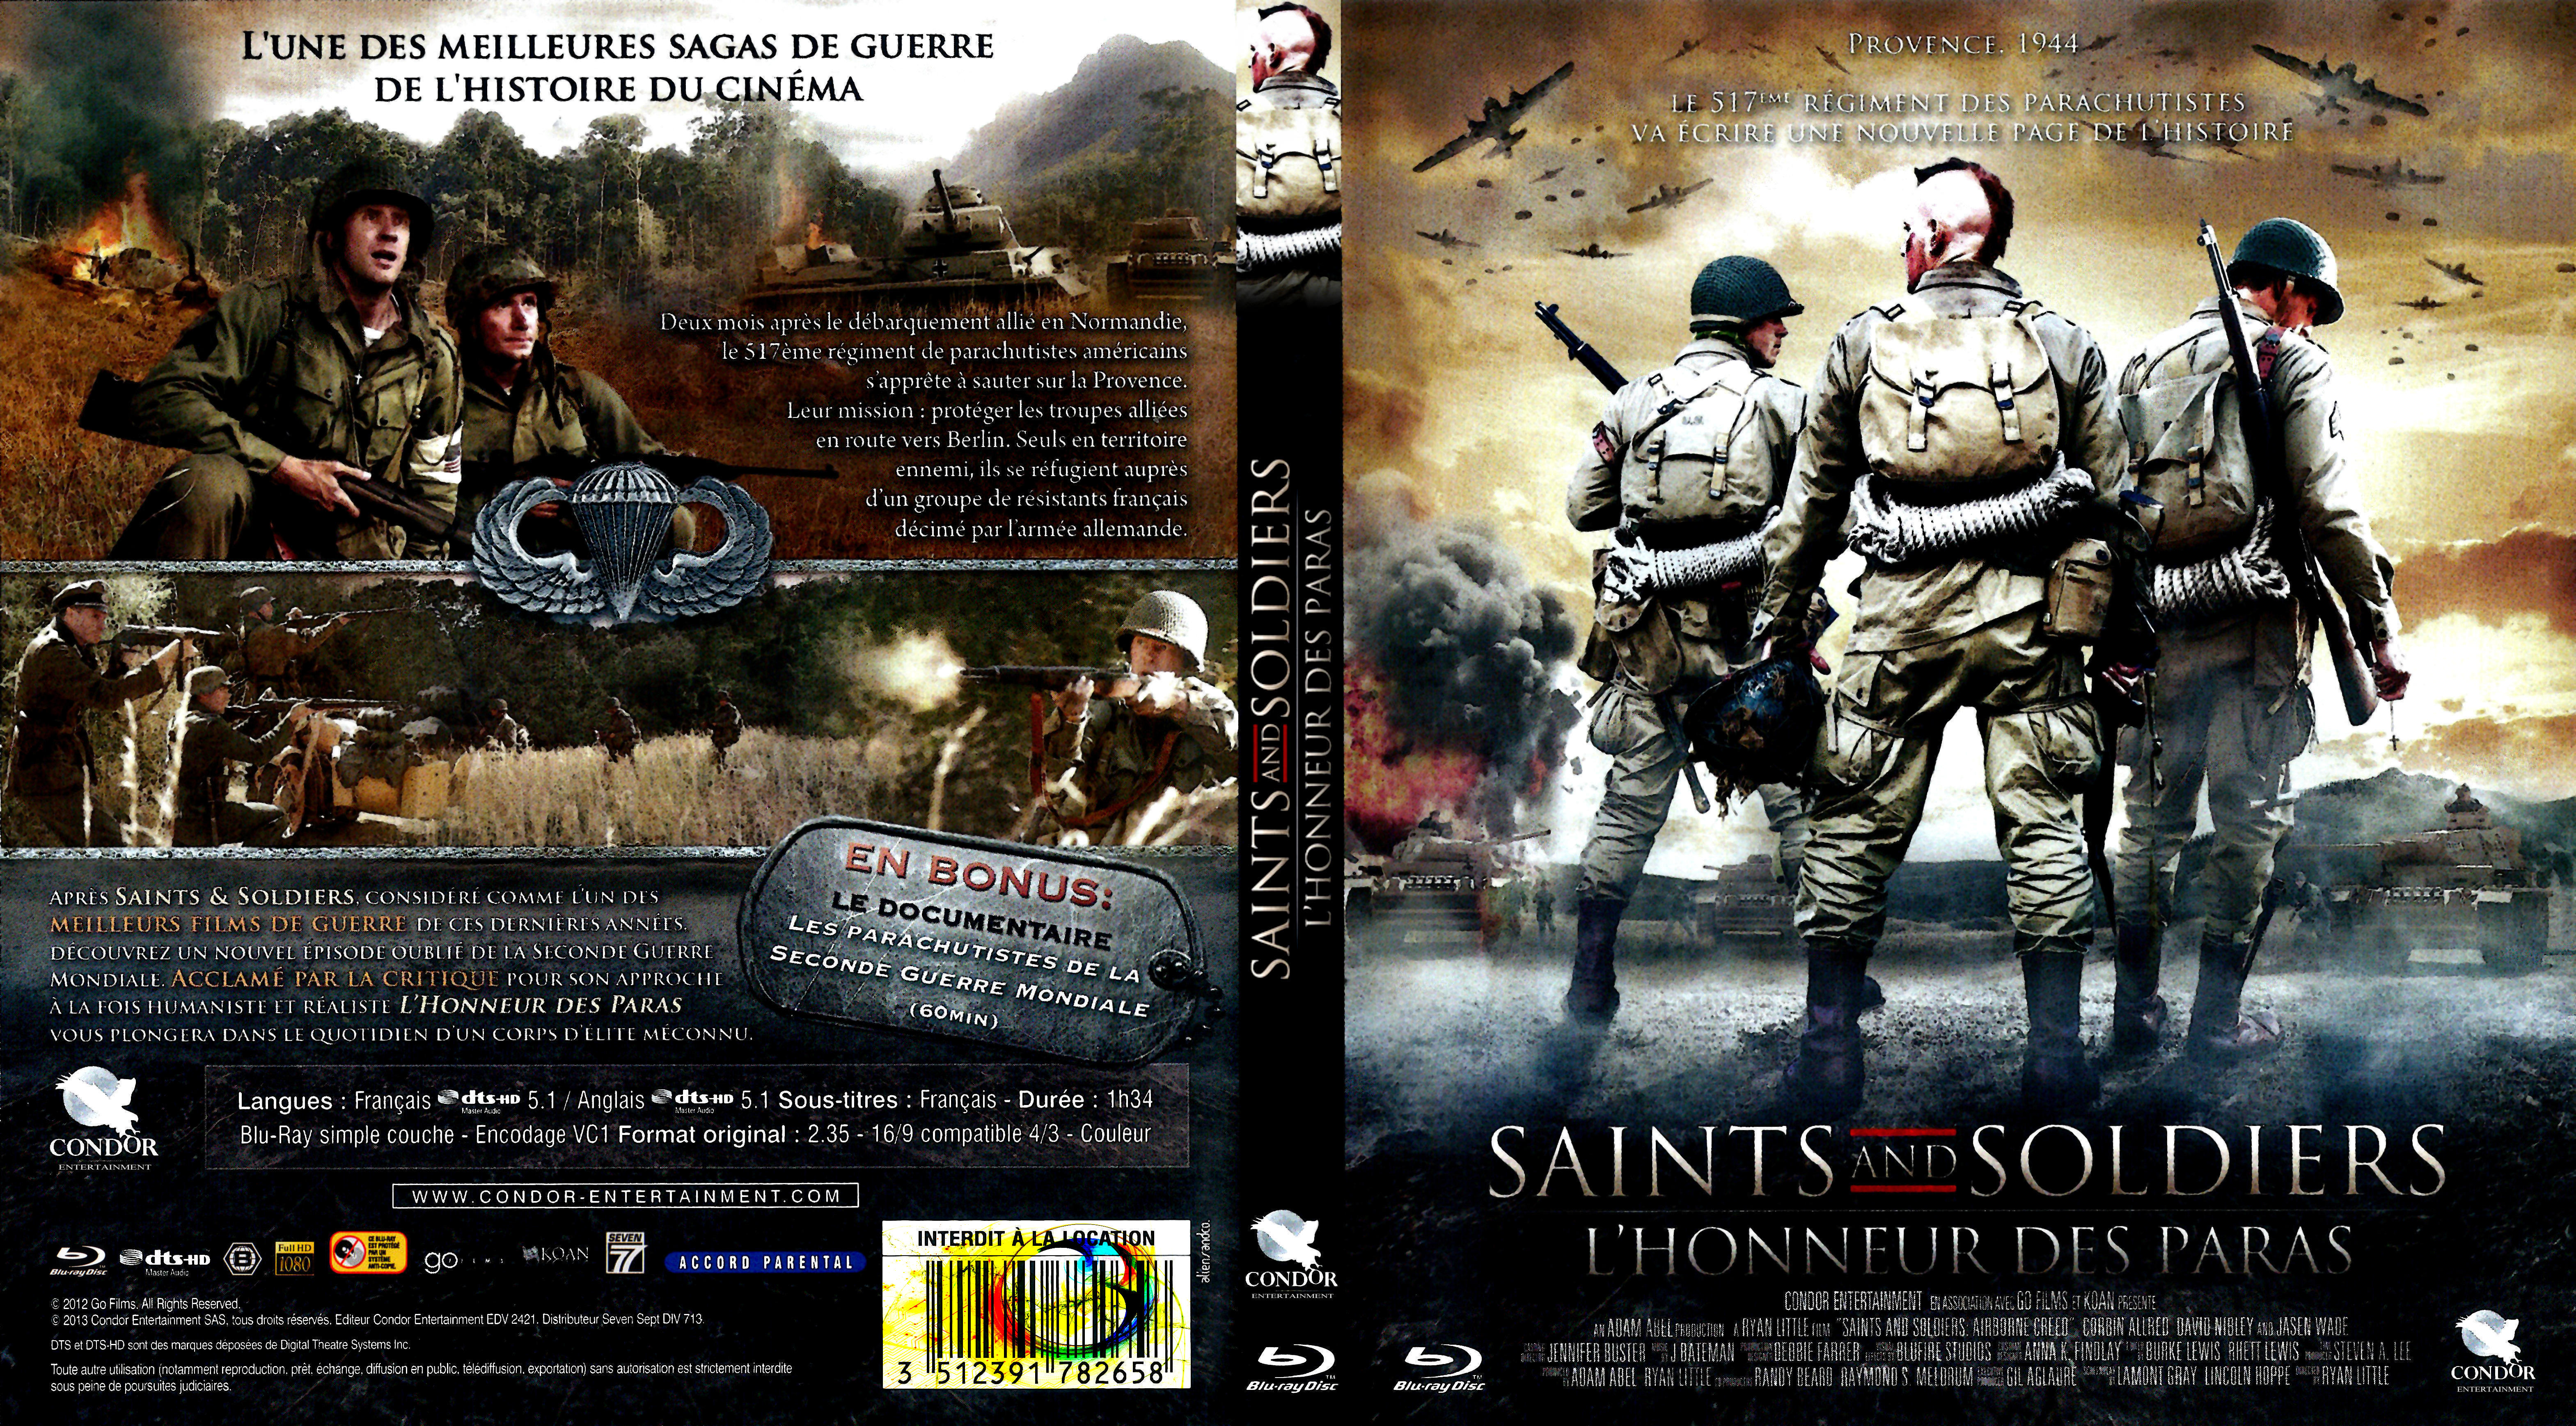 Jaquette DVD Saint and soldiers 2 l